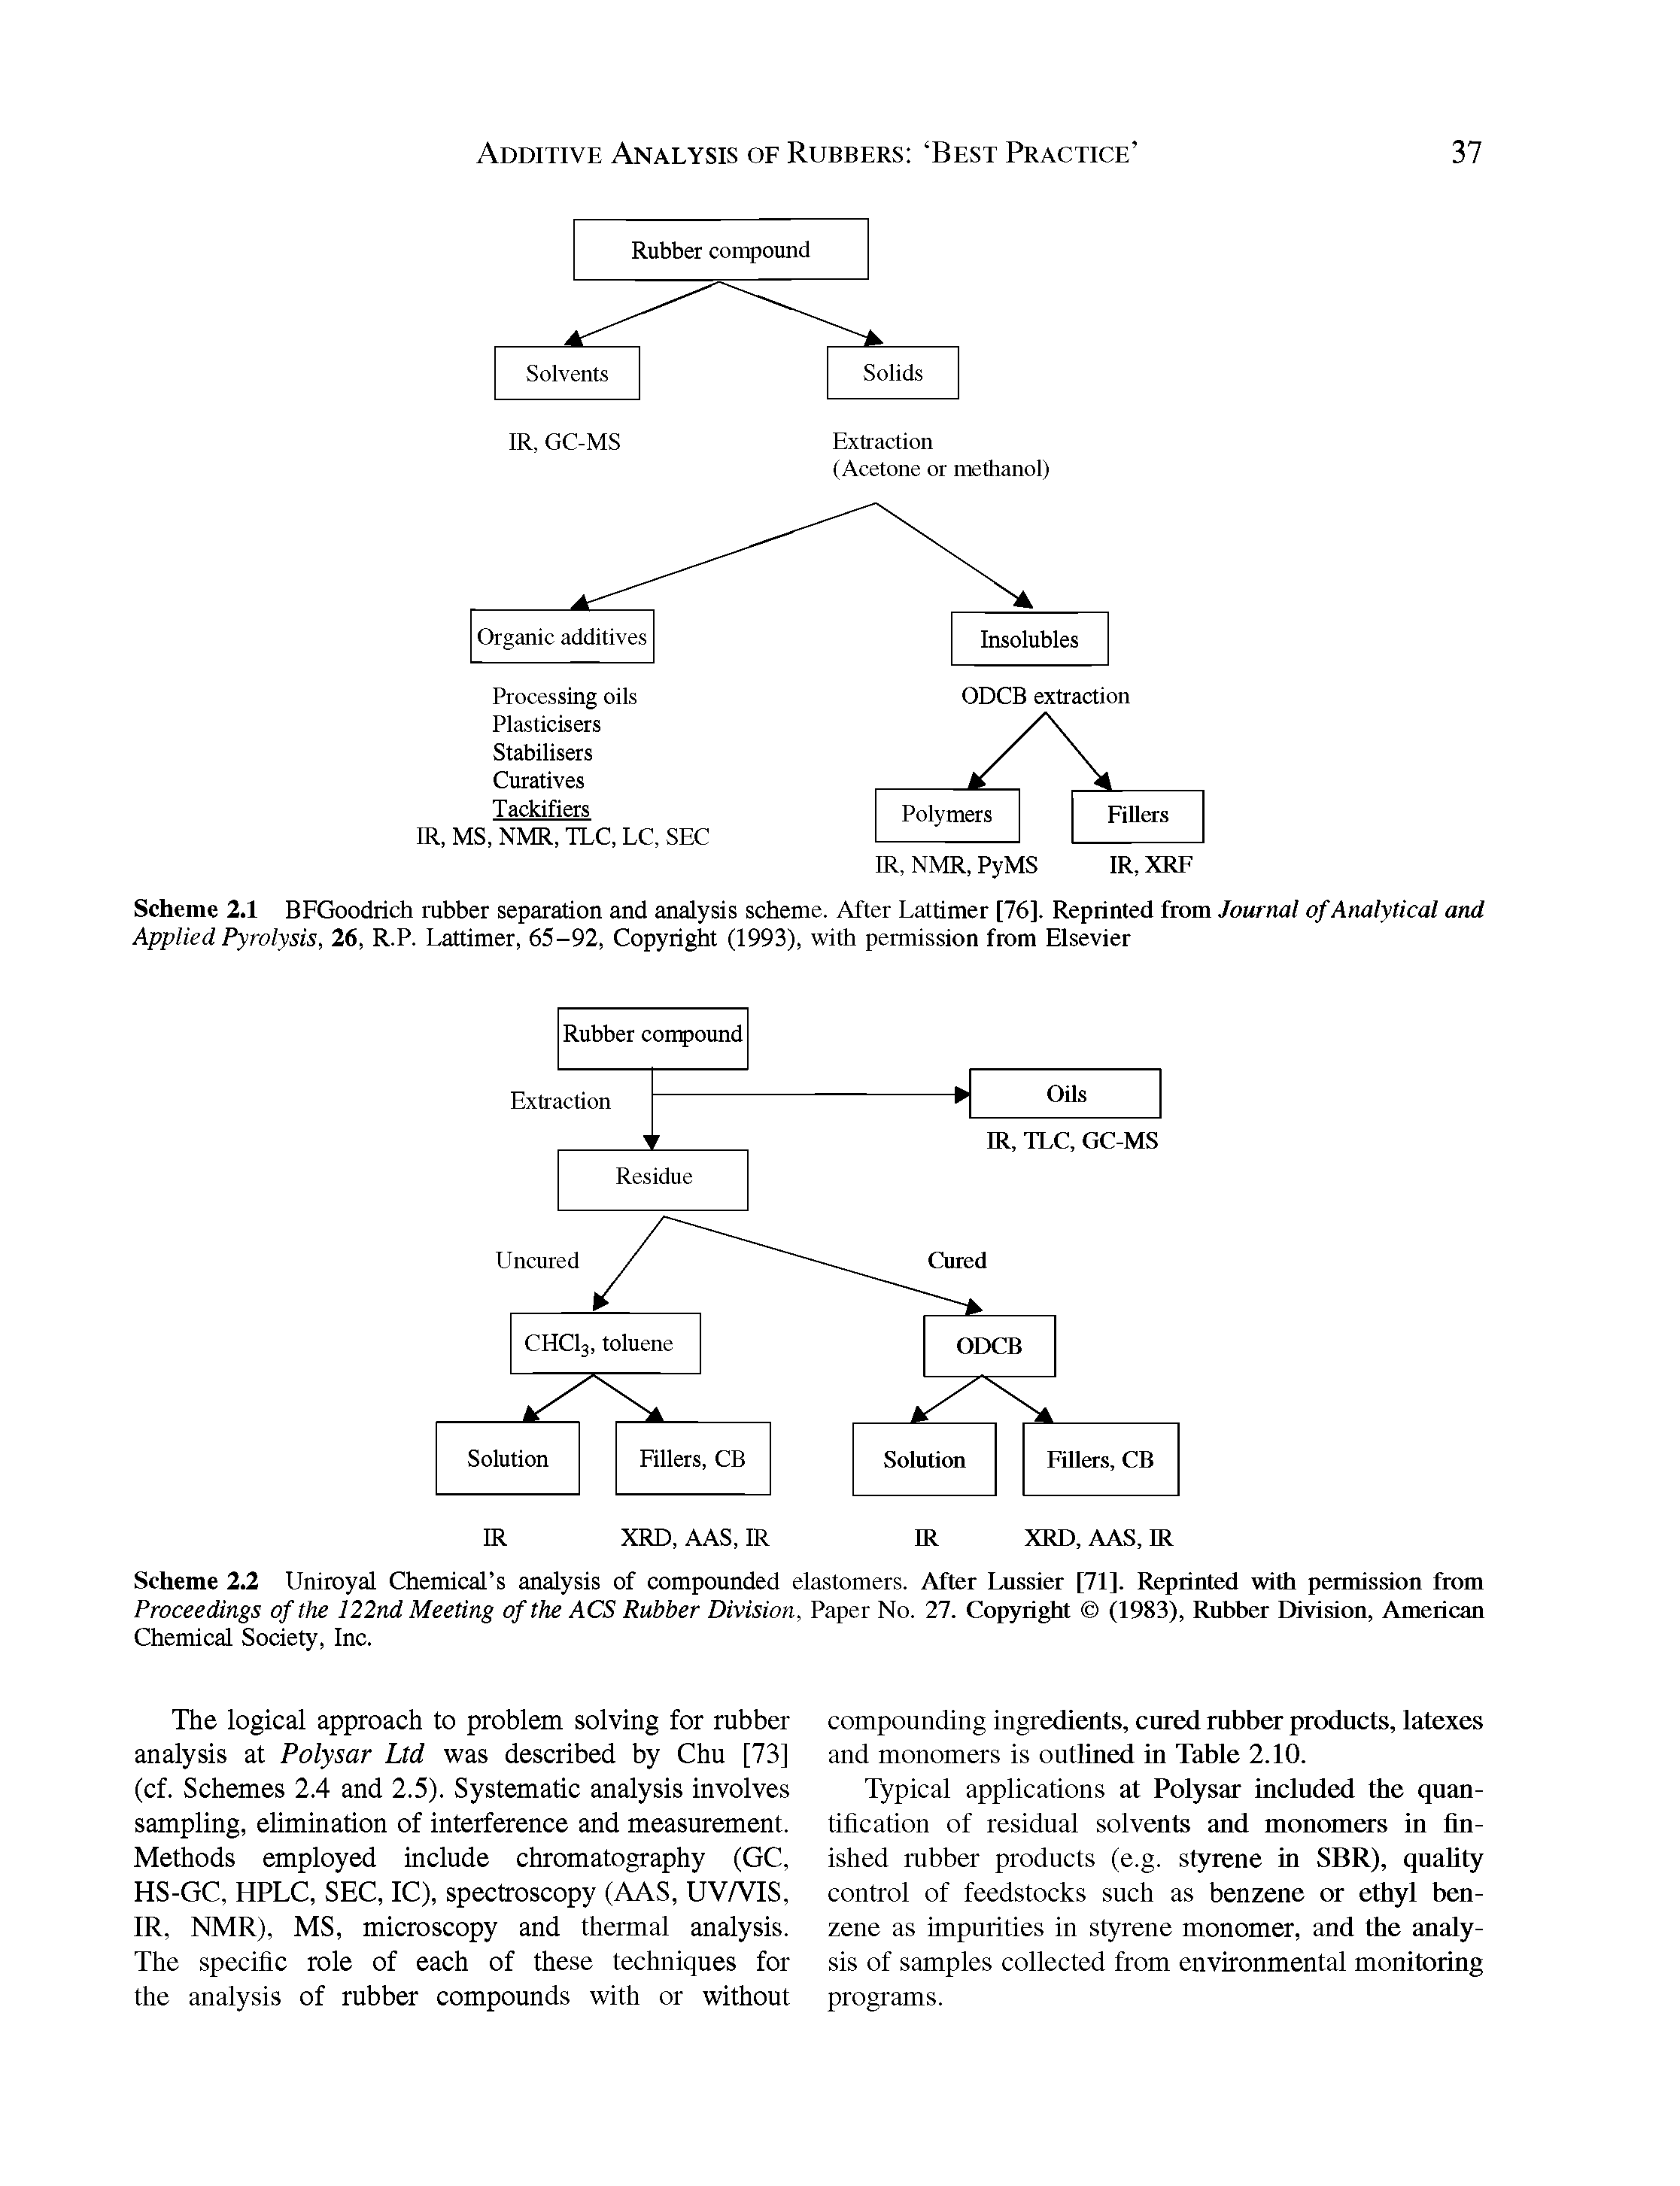 Scheme 2.2 Uniroyal Chemical s analysis of compounded elastomers. After Lussier [71]. Reprinted with permission from Proceedings of the 122nd Meeting of the ACS Rubber Division, Paper No. 27. Copyright (1983), Rubber Division, American Chemical Society, Inc.